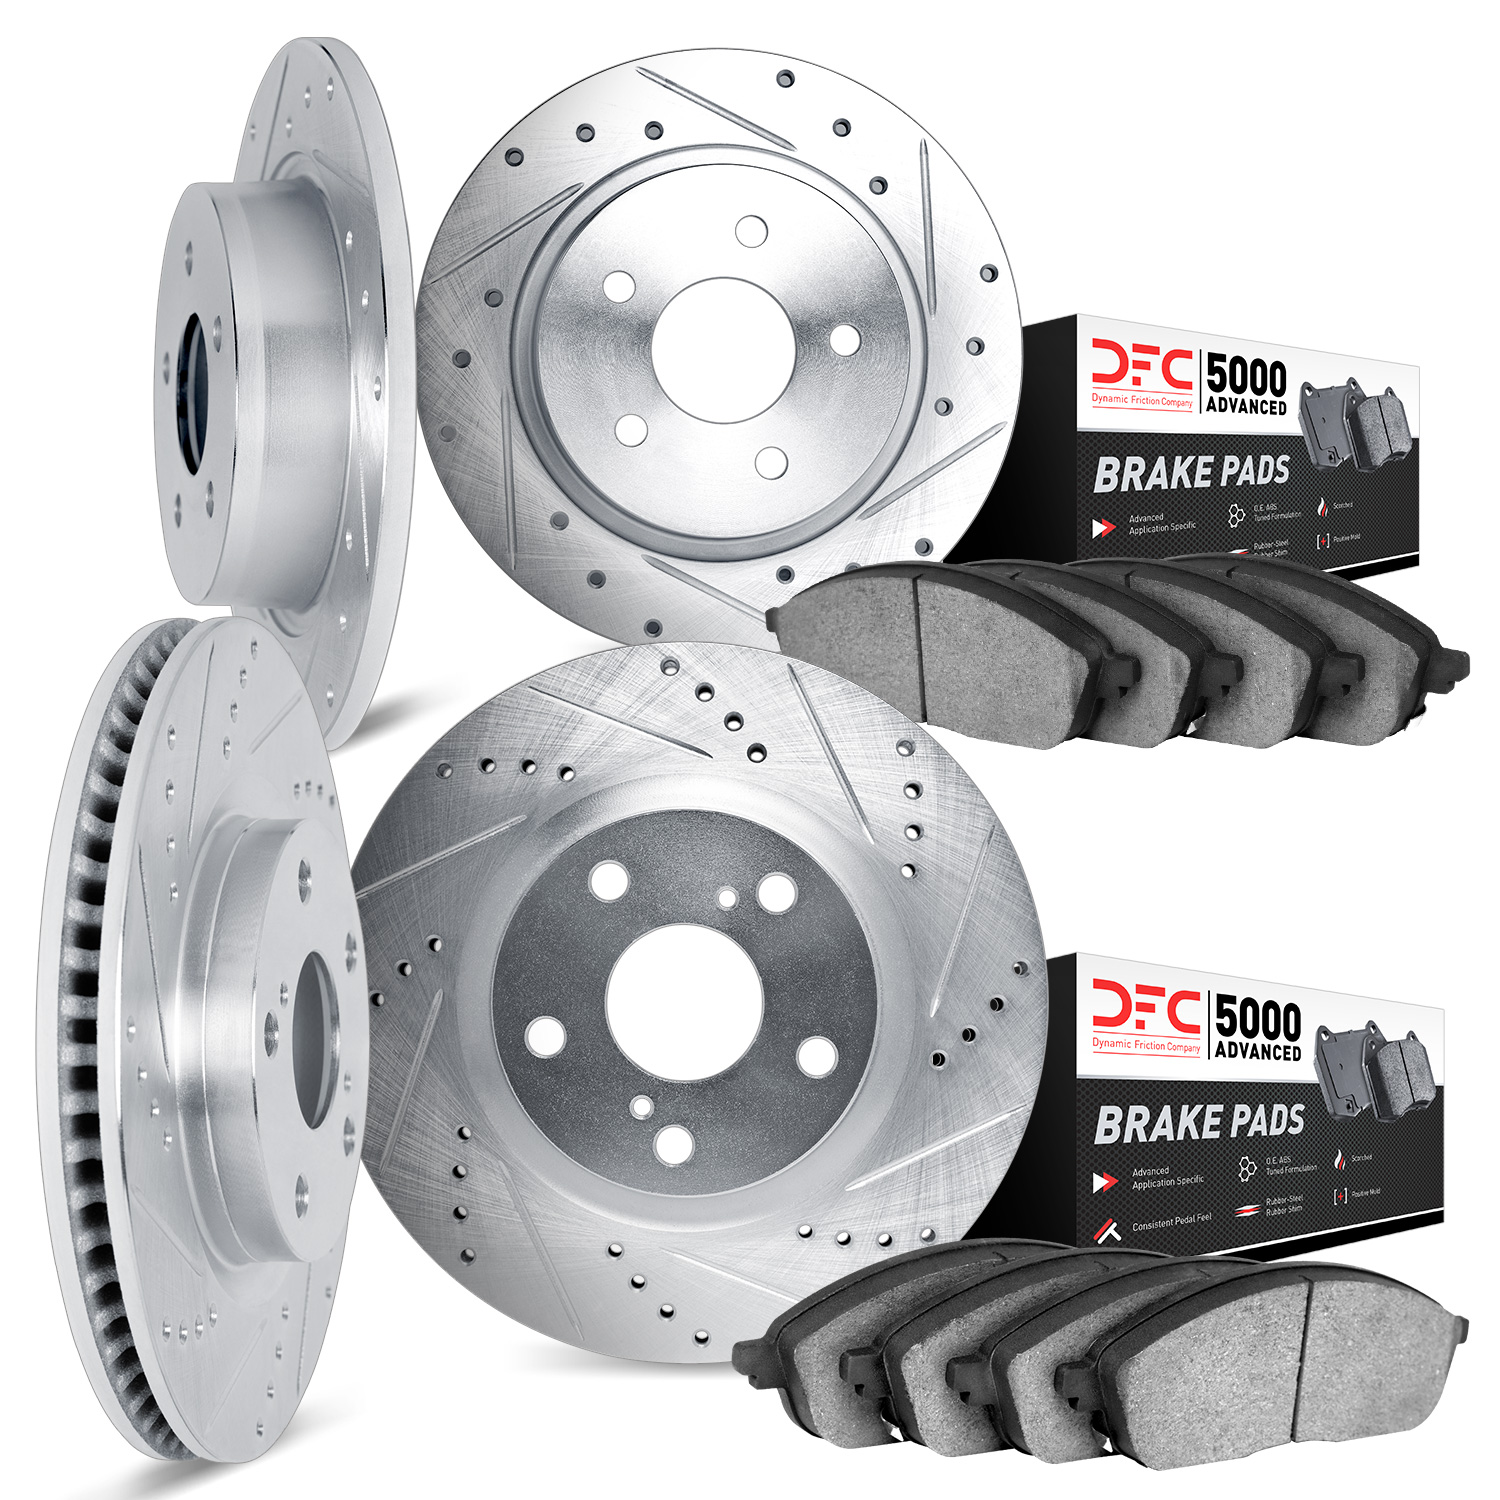 7504-40253 Drilled/Slotted Brake Rotors w/5000 Advanced Brake Pads Kit [Silver], 2014-2021 Mopar, Position: Front and Rear